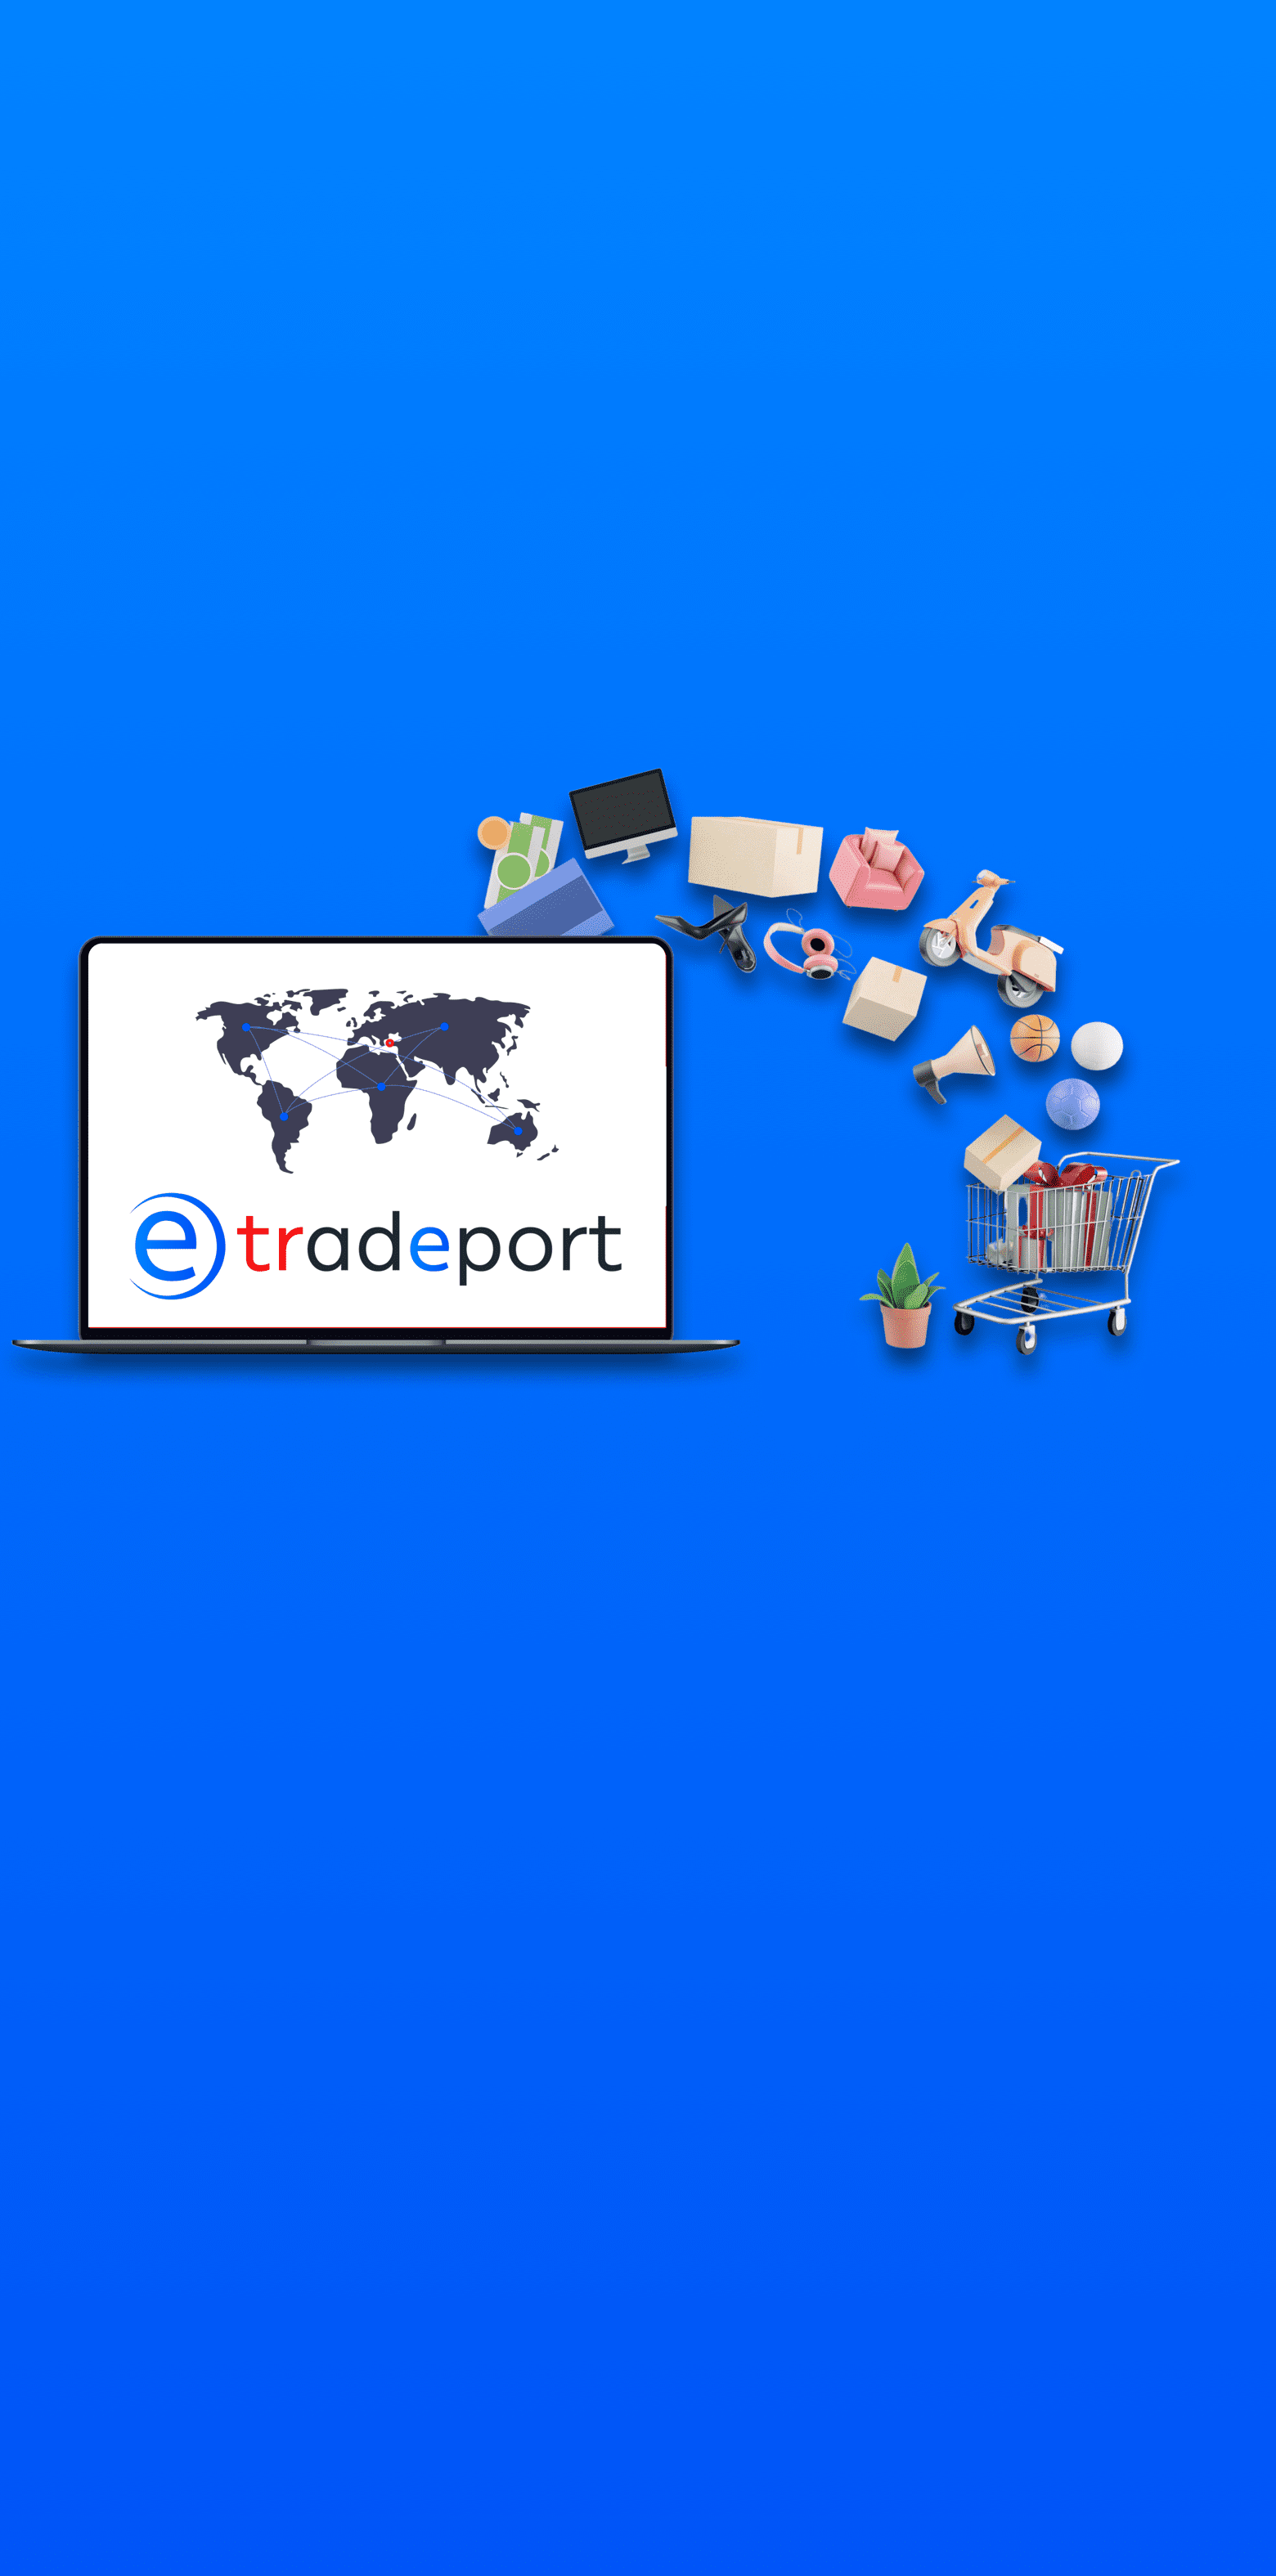 Tradeport auth cover images